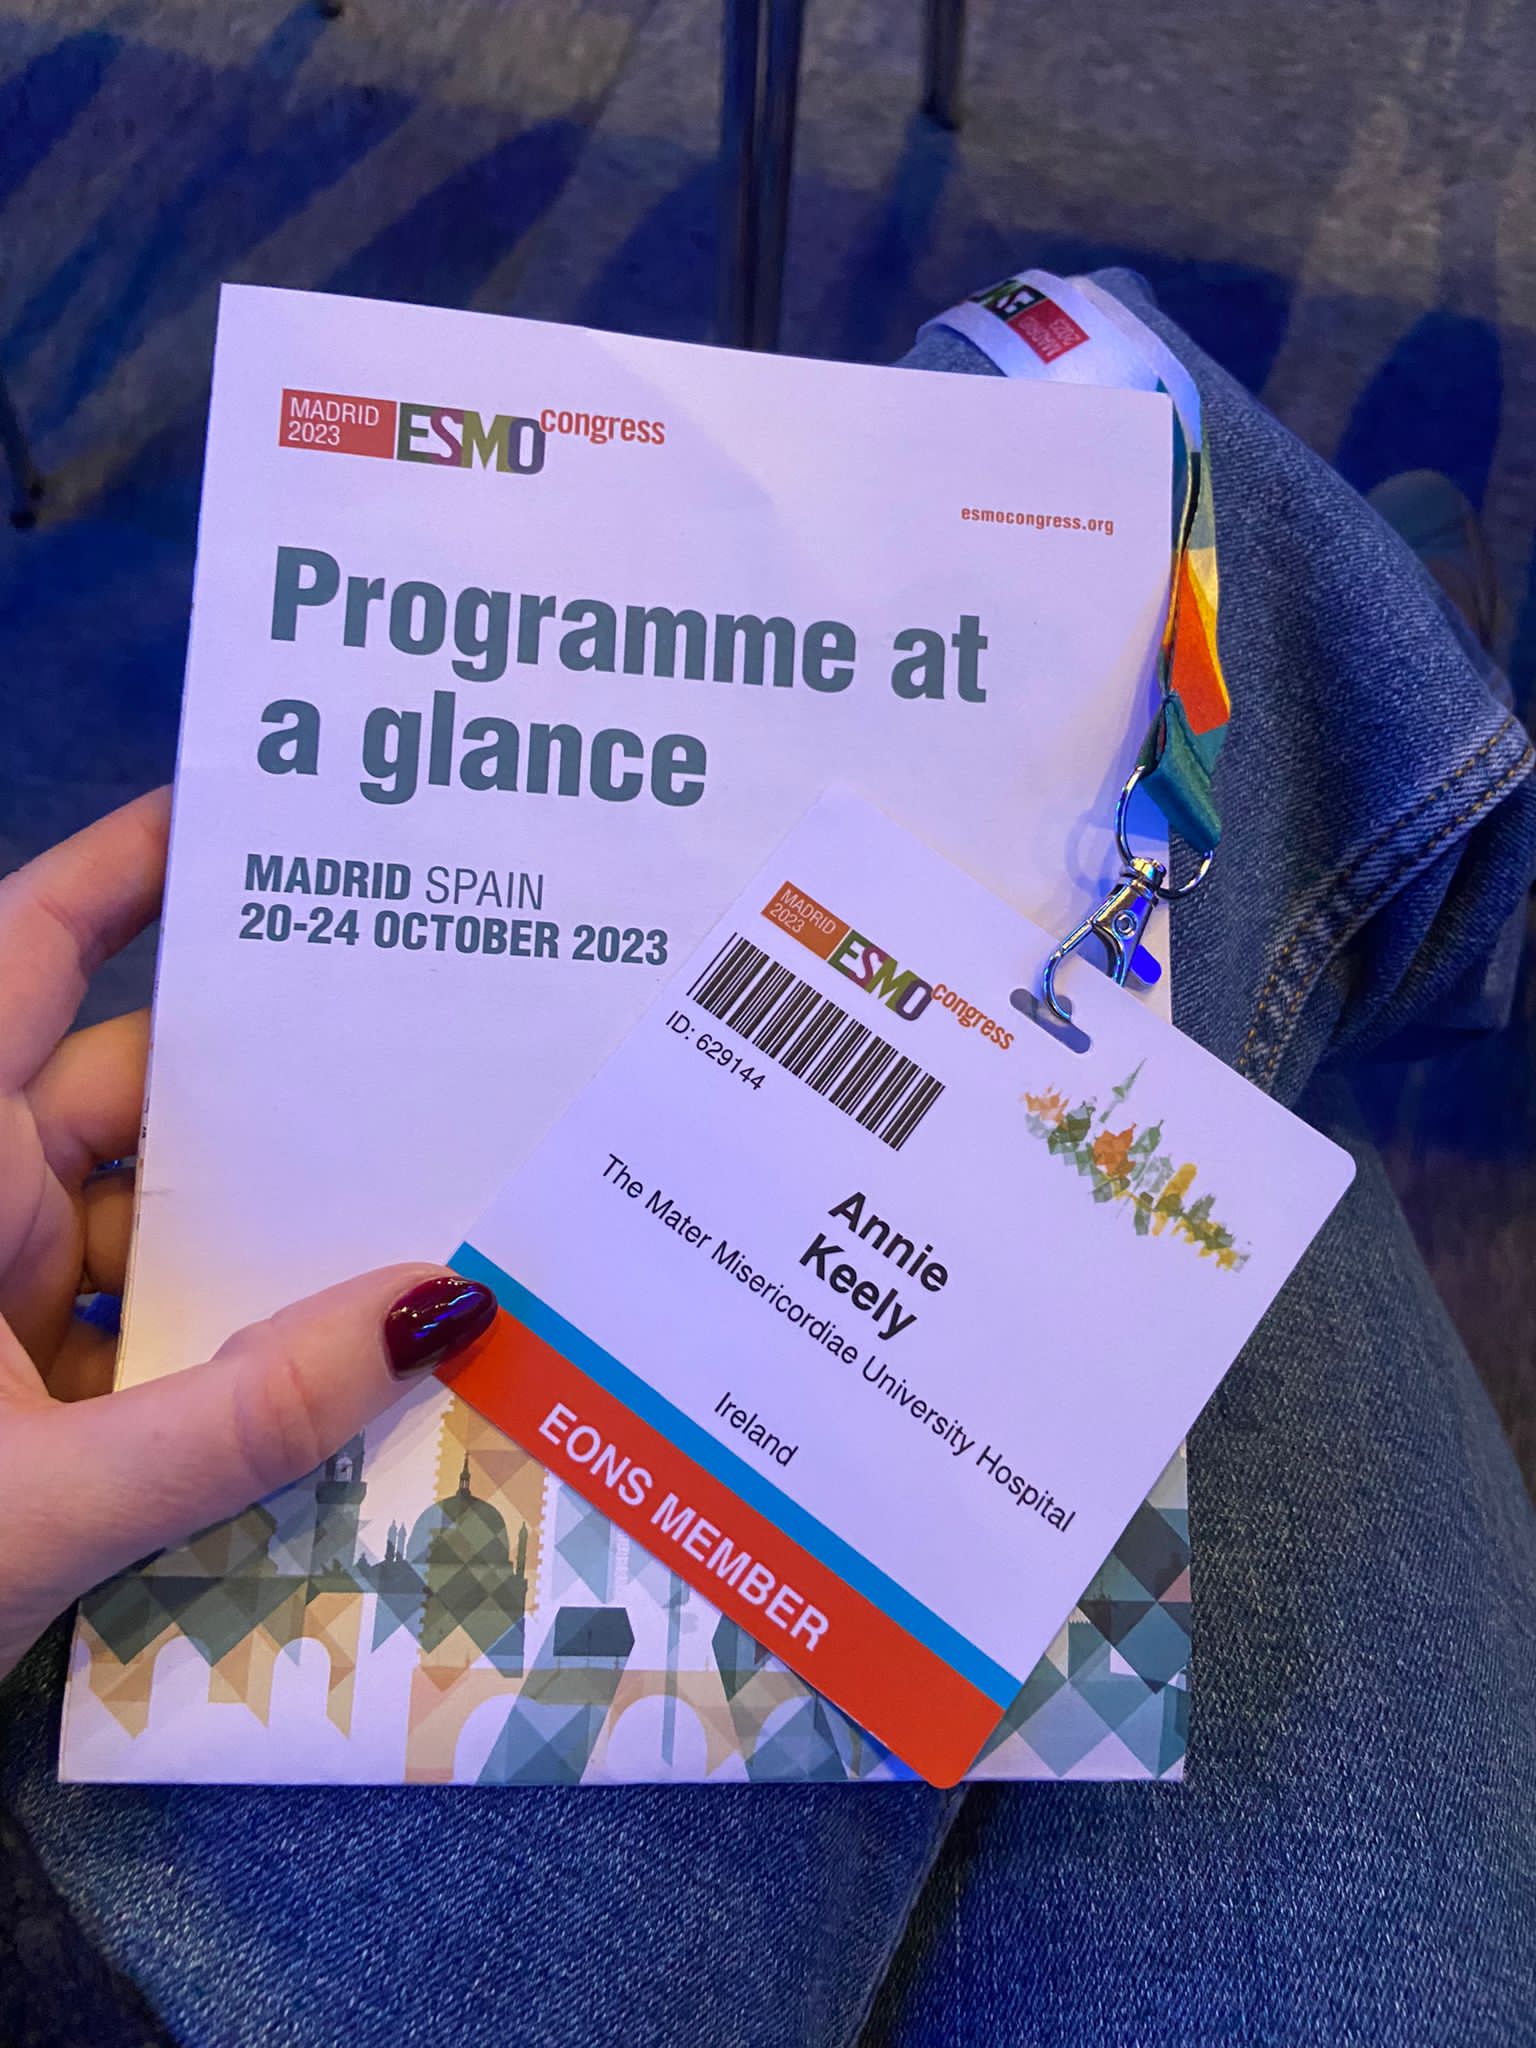 A picture of the brochure and attendee badge for Annie Keely for the 2023 ESMO Congress